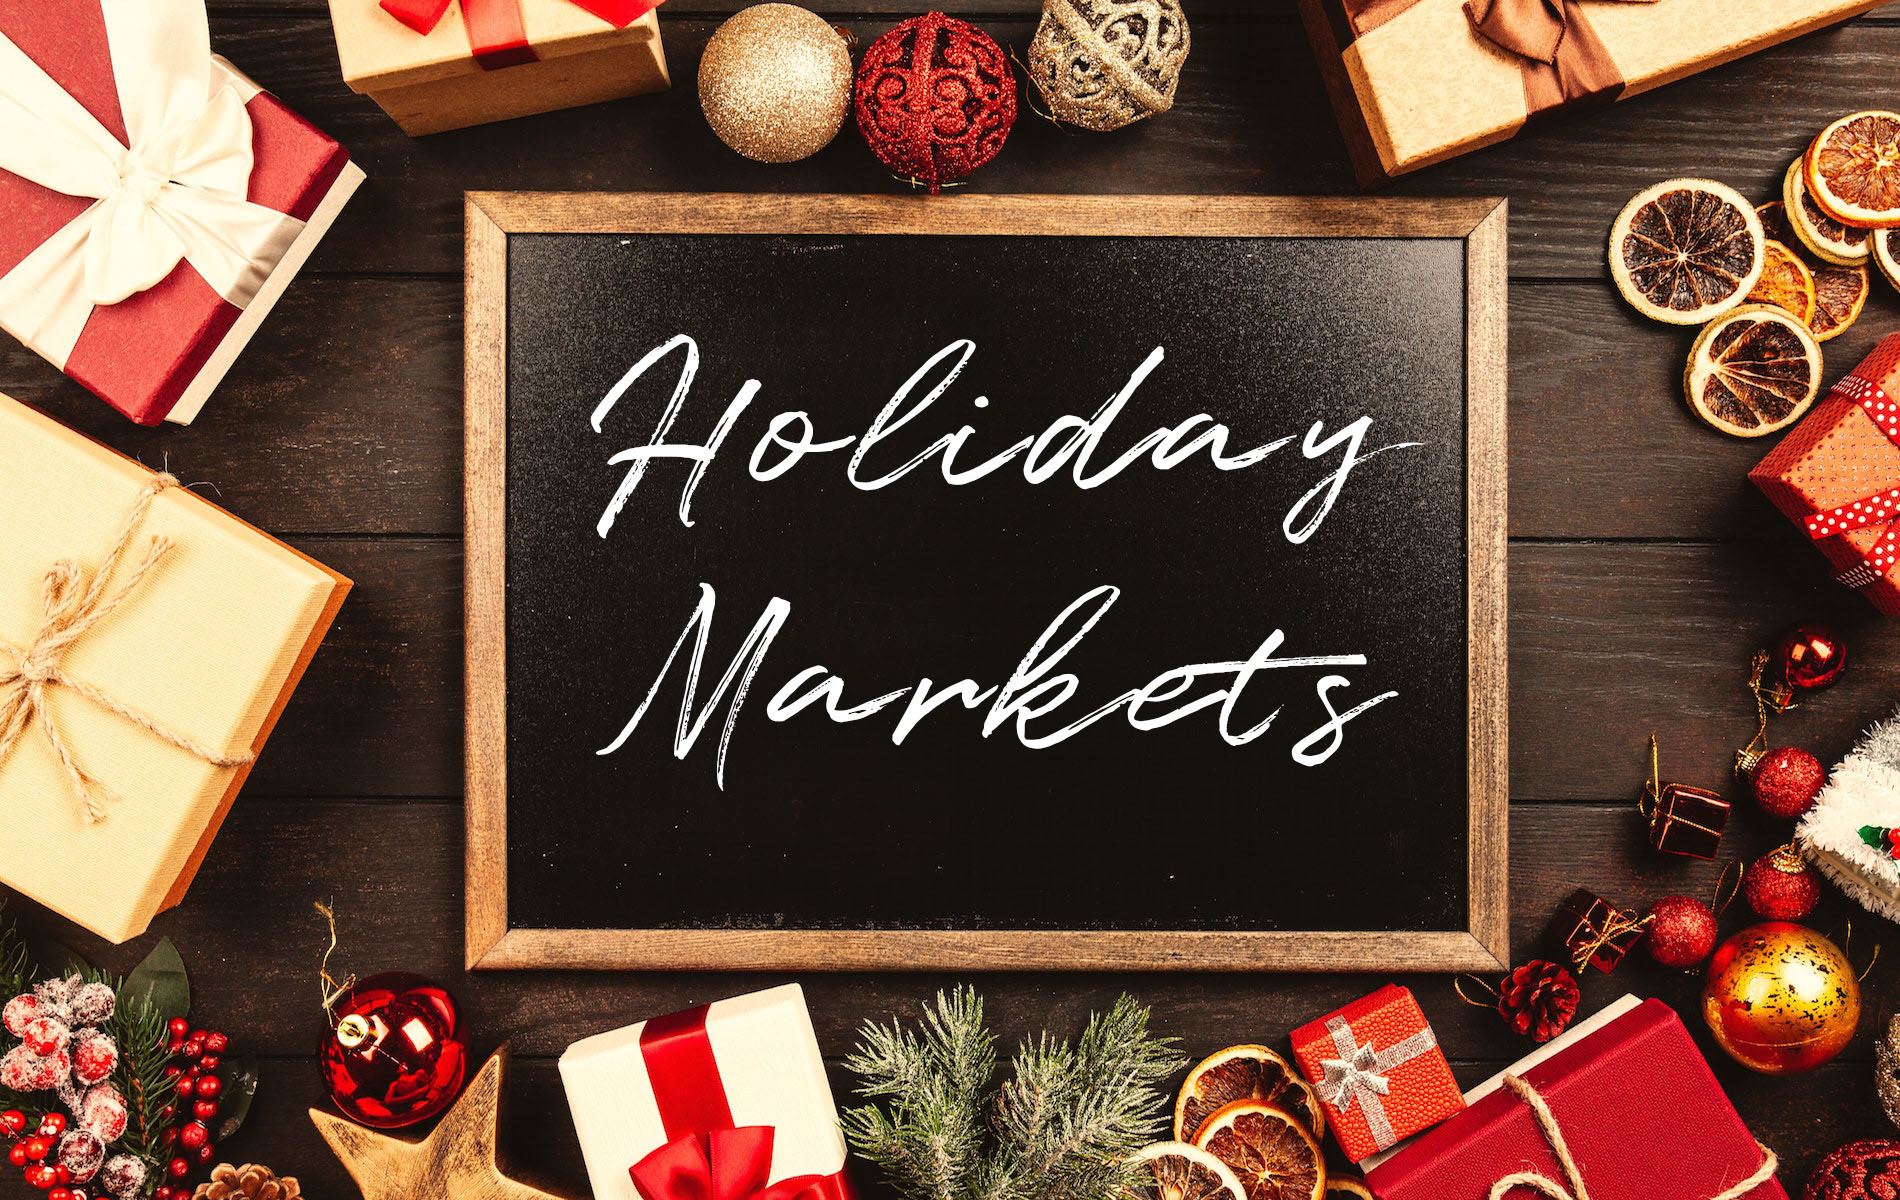 The Best Boston Holiday Markets